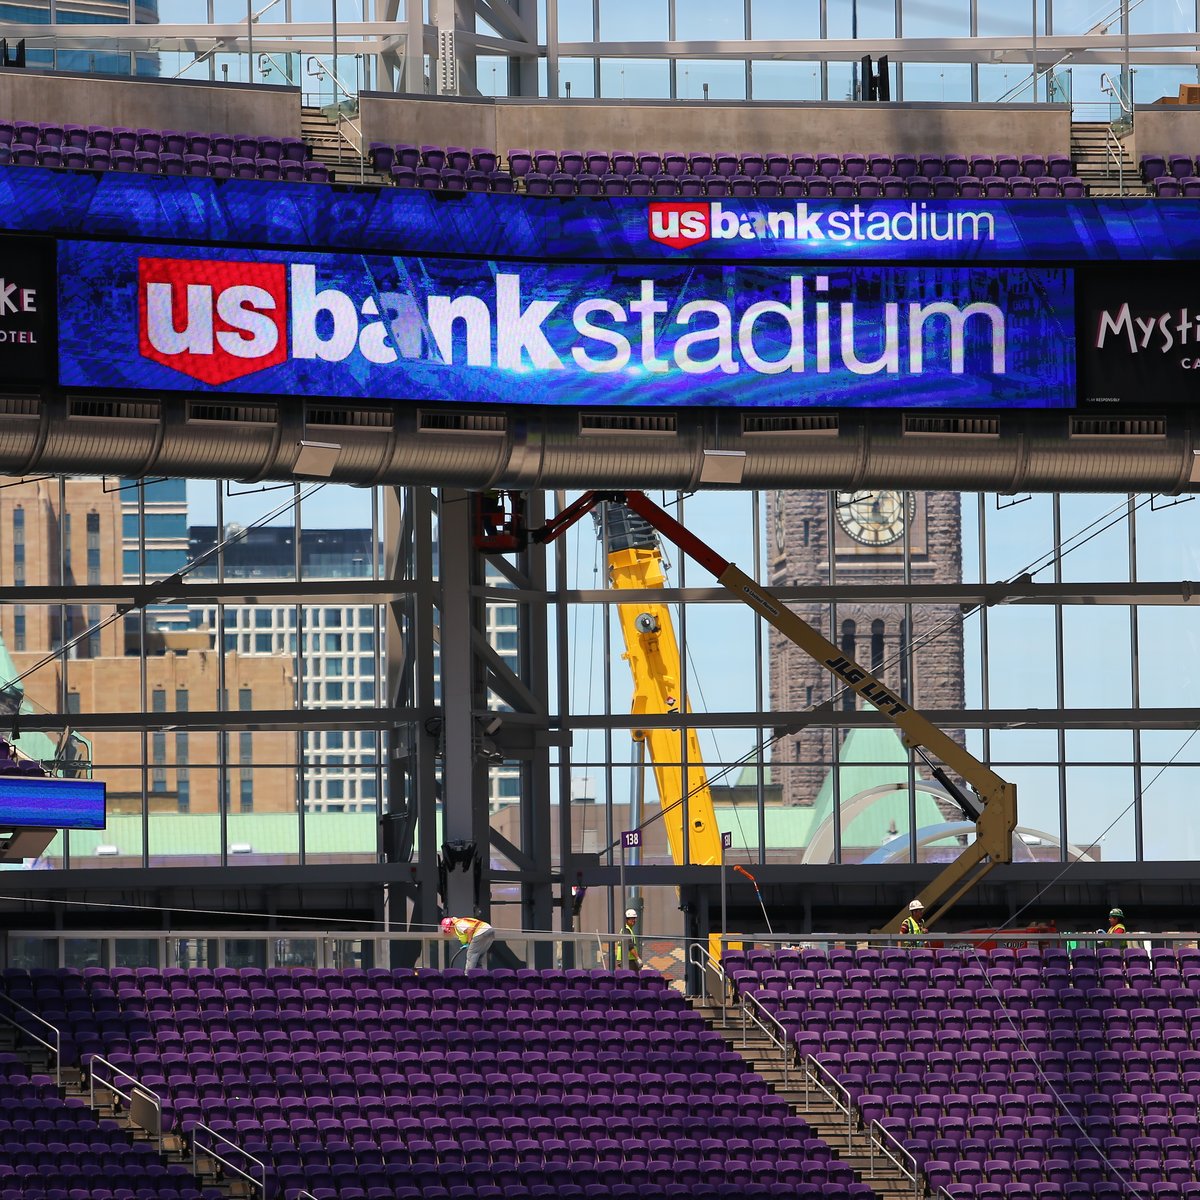 Delta Sky360 Club will offer up-close views of Vikings at U.S. Bank Stadium  - Minneapolis / St. Paul Business Journal